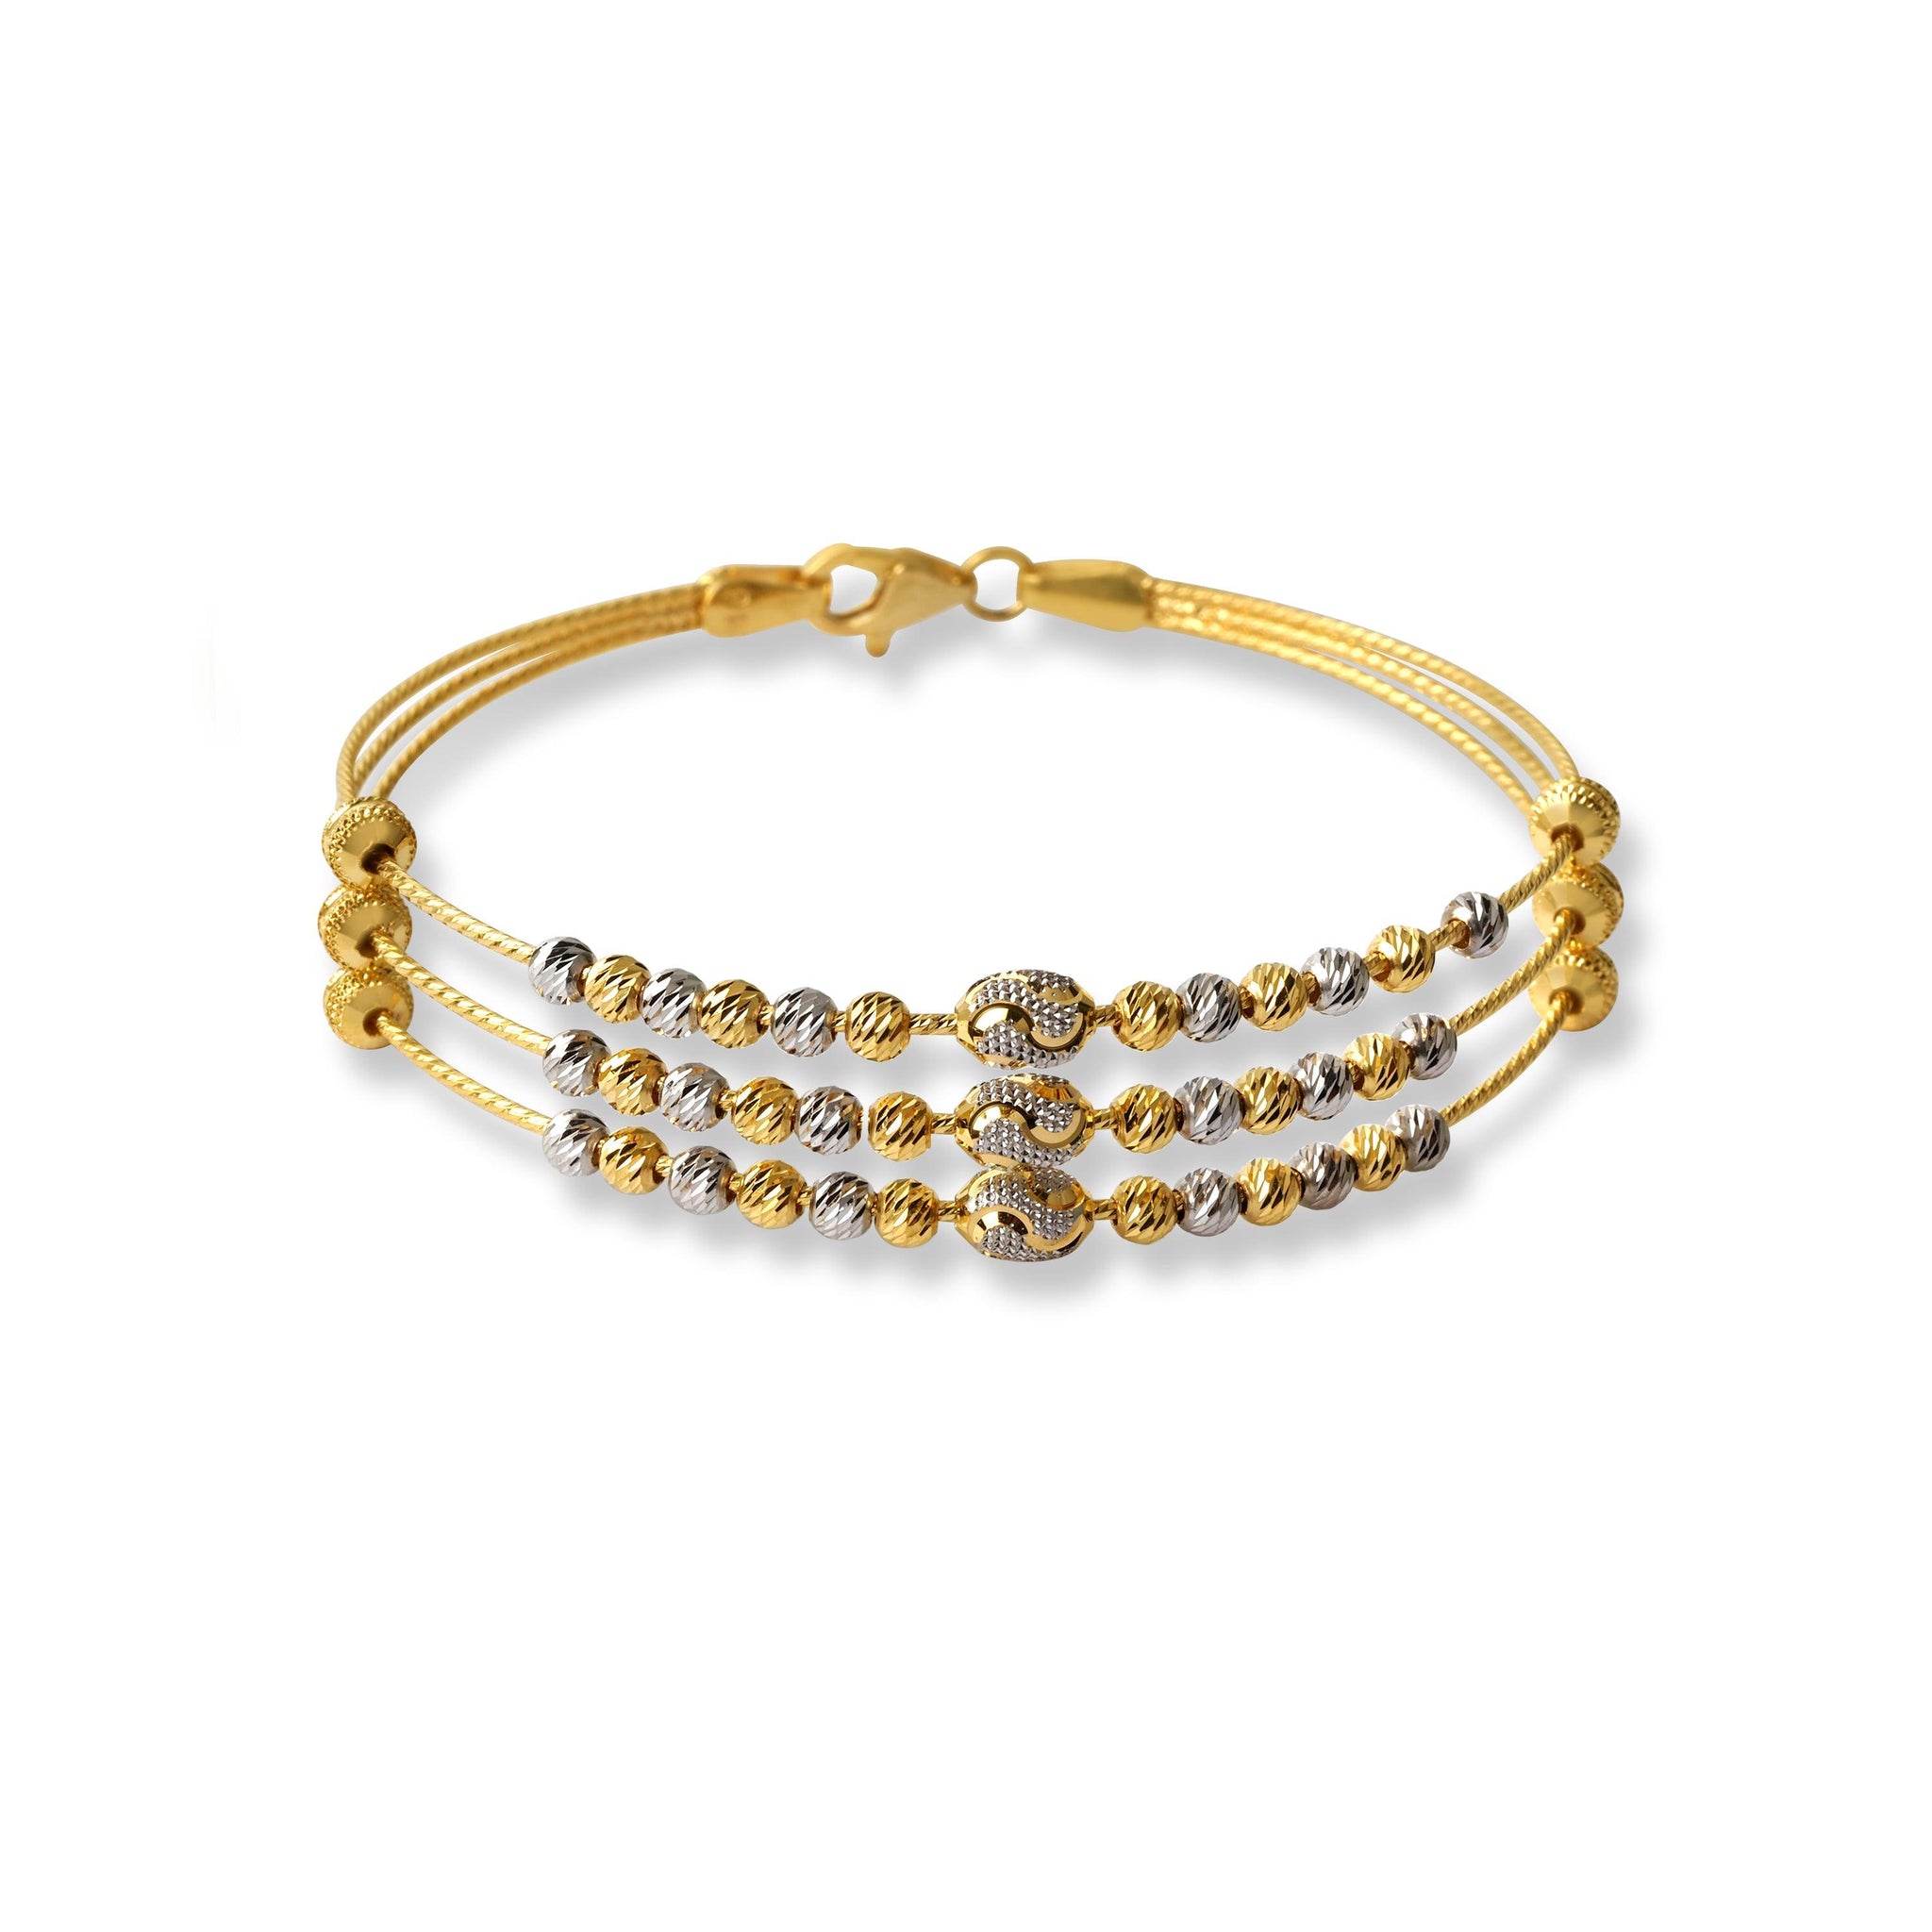 22ct Gold Rhodium Plated Beads Bangle With Rounded Trigger Clasp (11.2g) B-8502